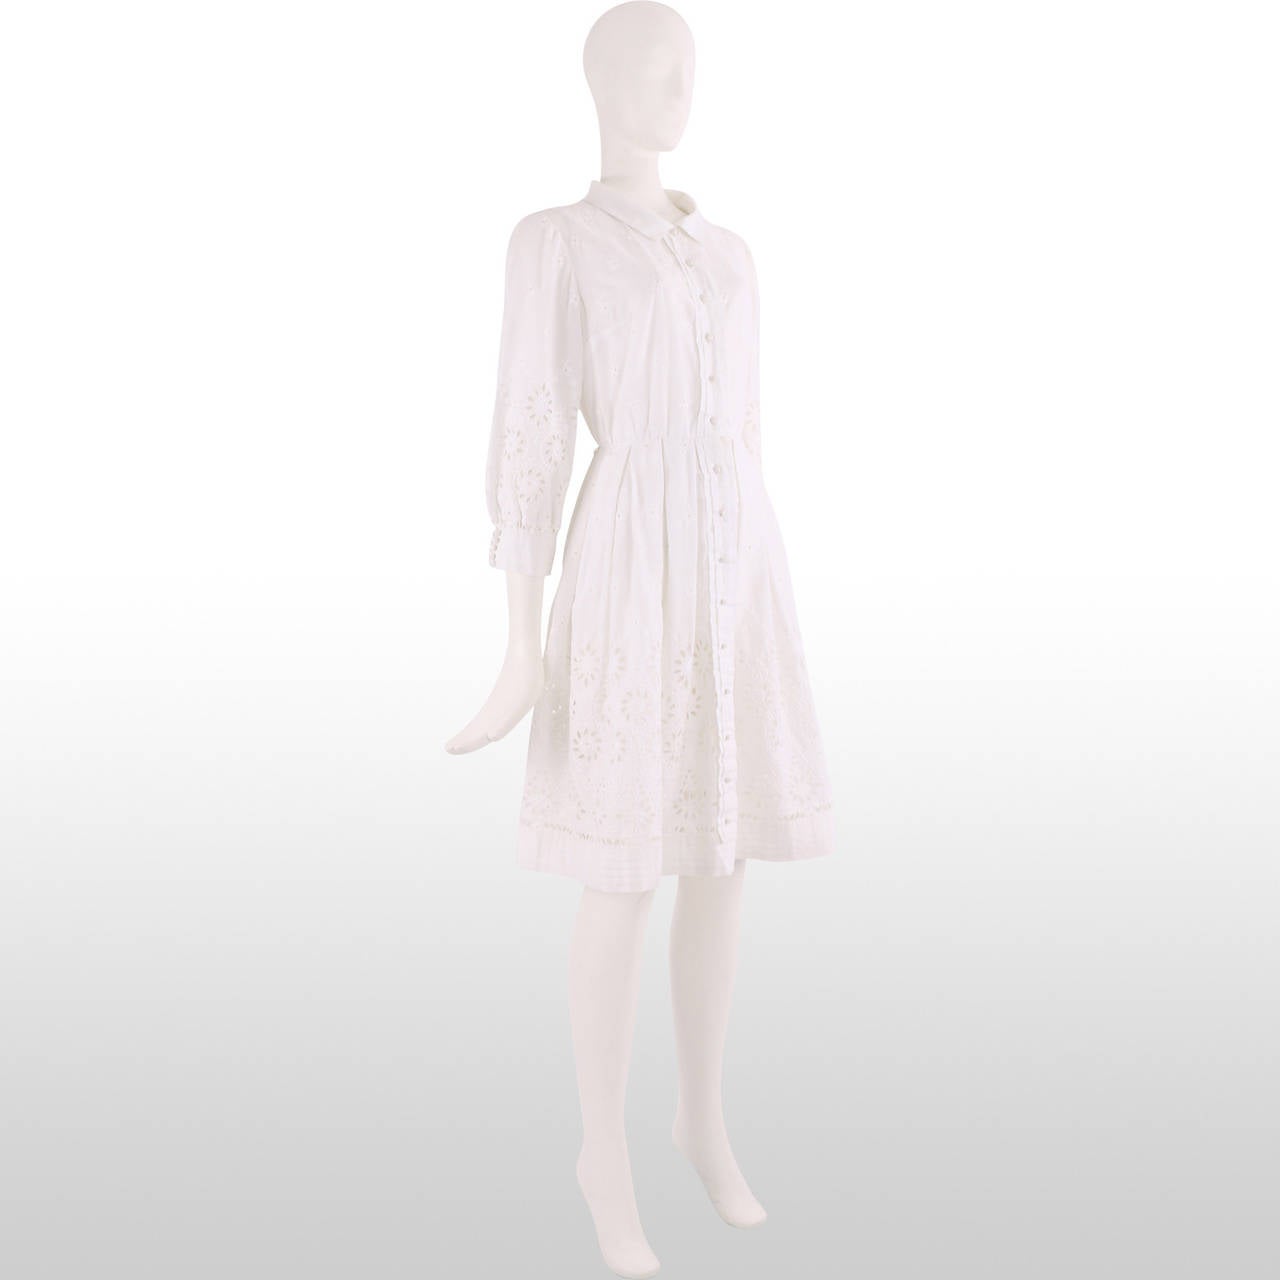 Women's 1950's White Cotton Broderie Anglaise Summer Dress